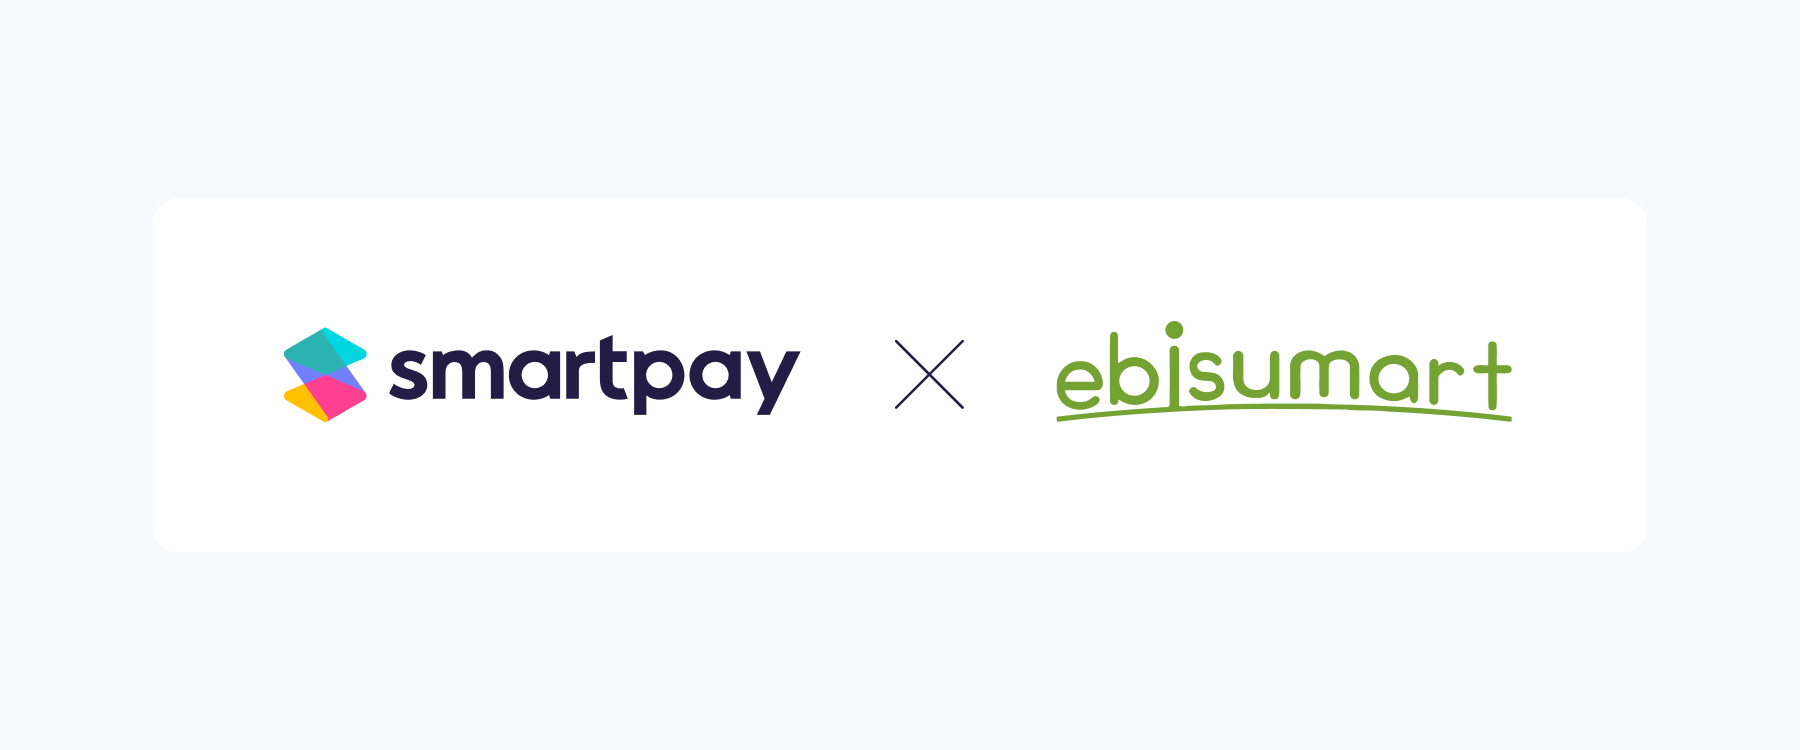 Smartpay is now available at Ebisumart